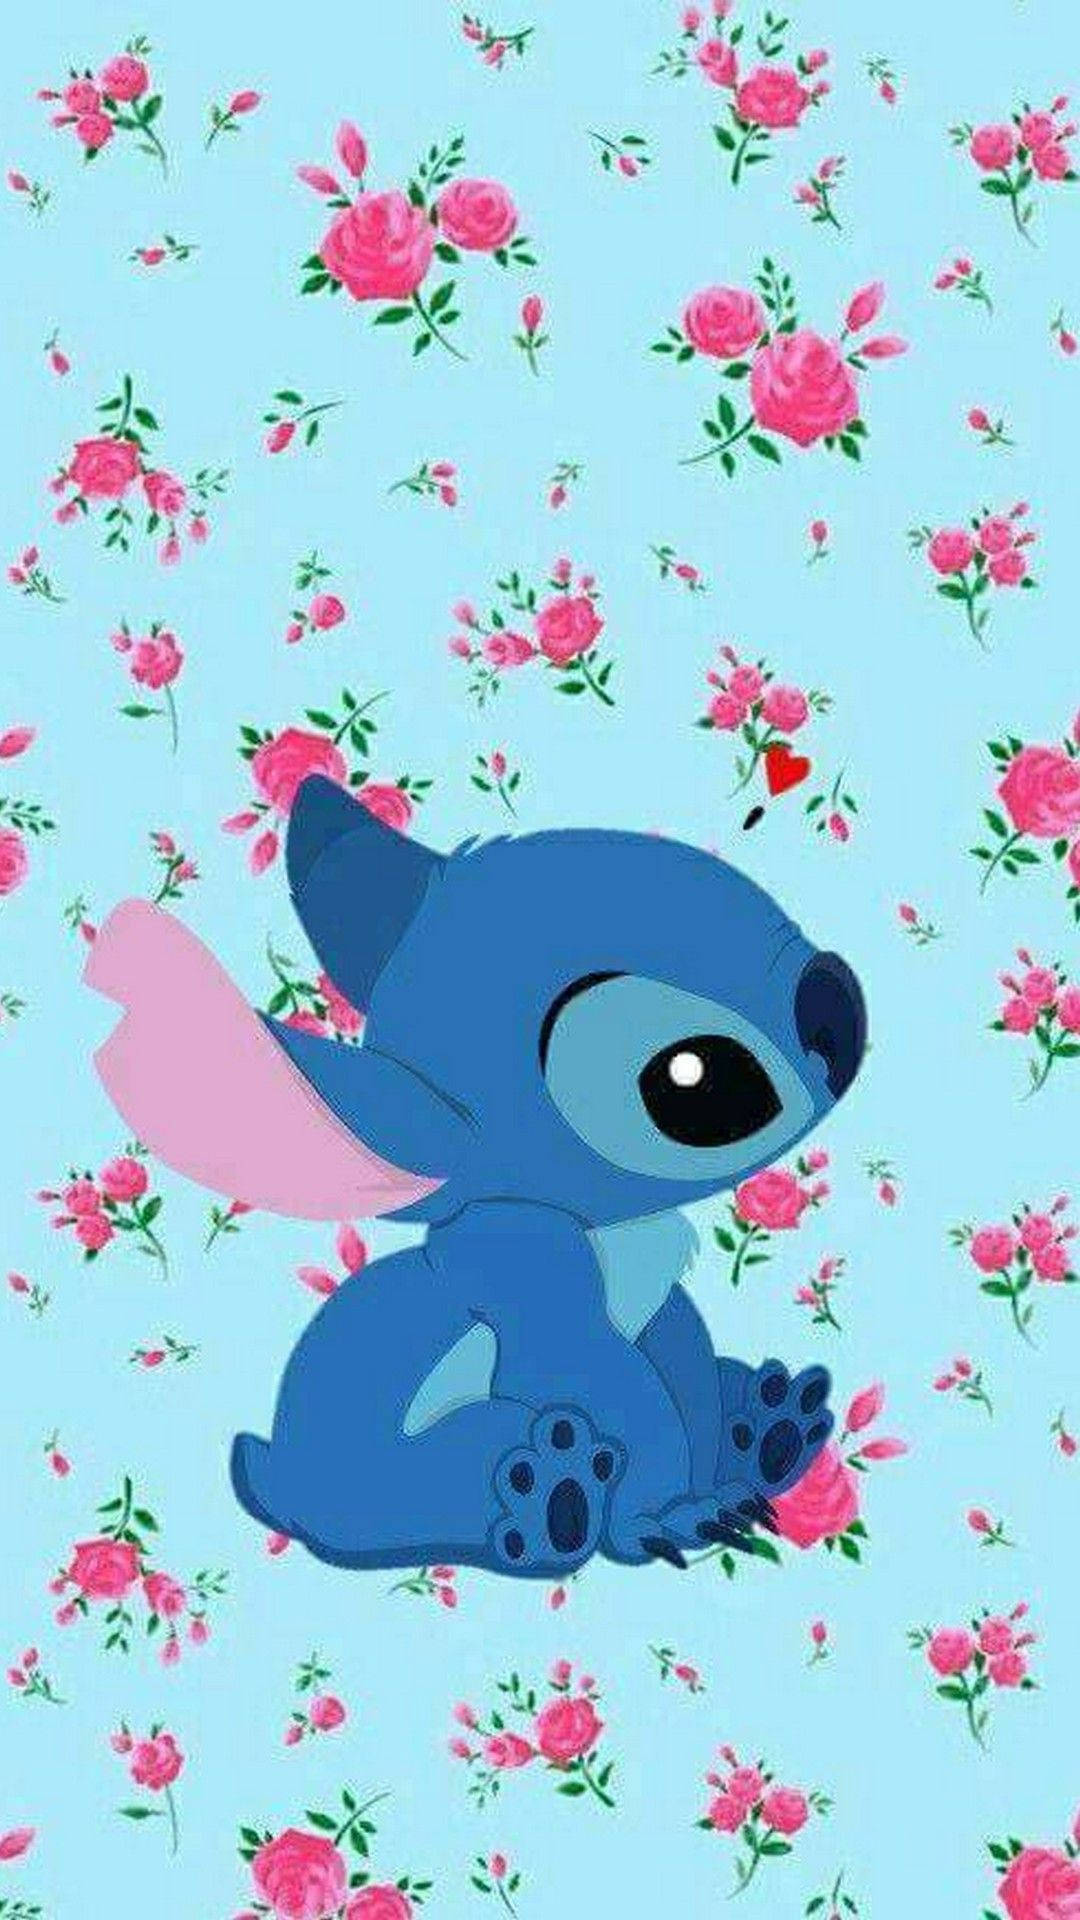 Stitch With Pink Roses Background